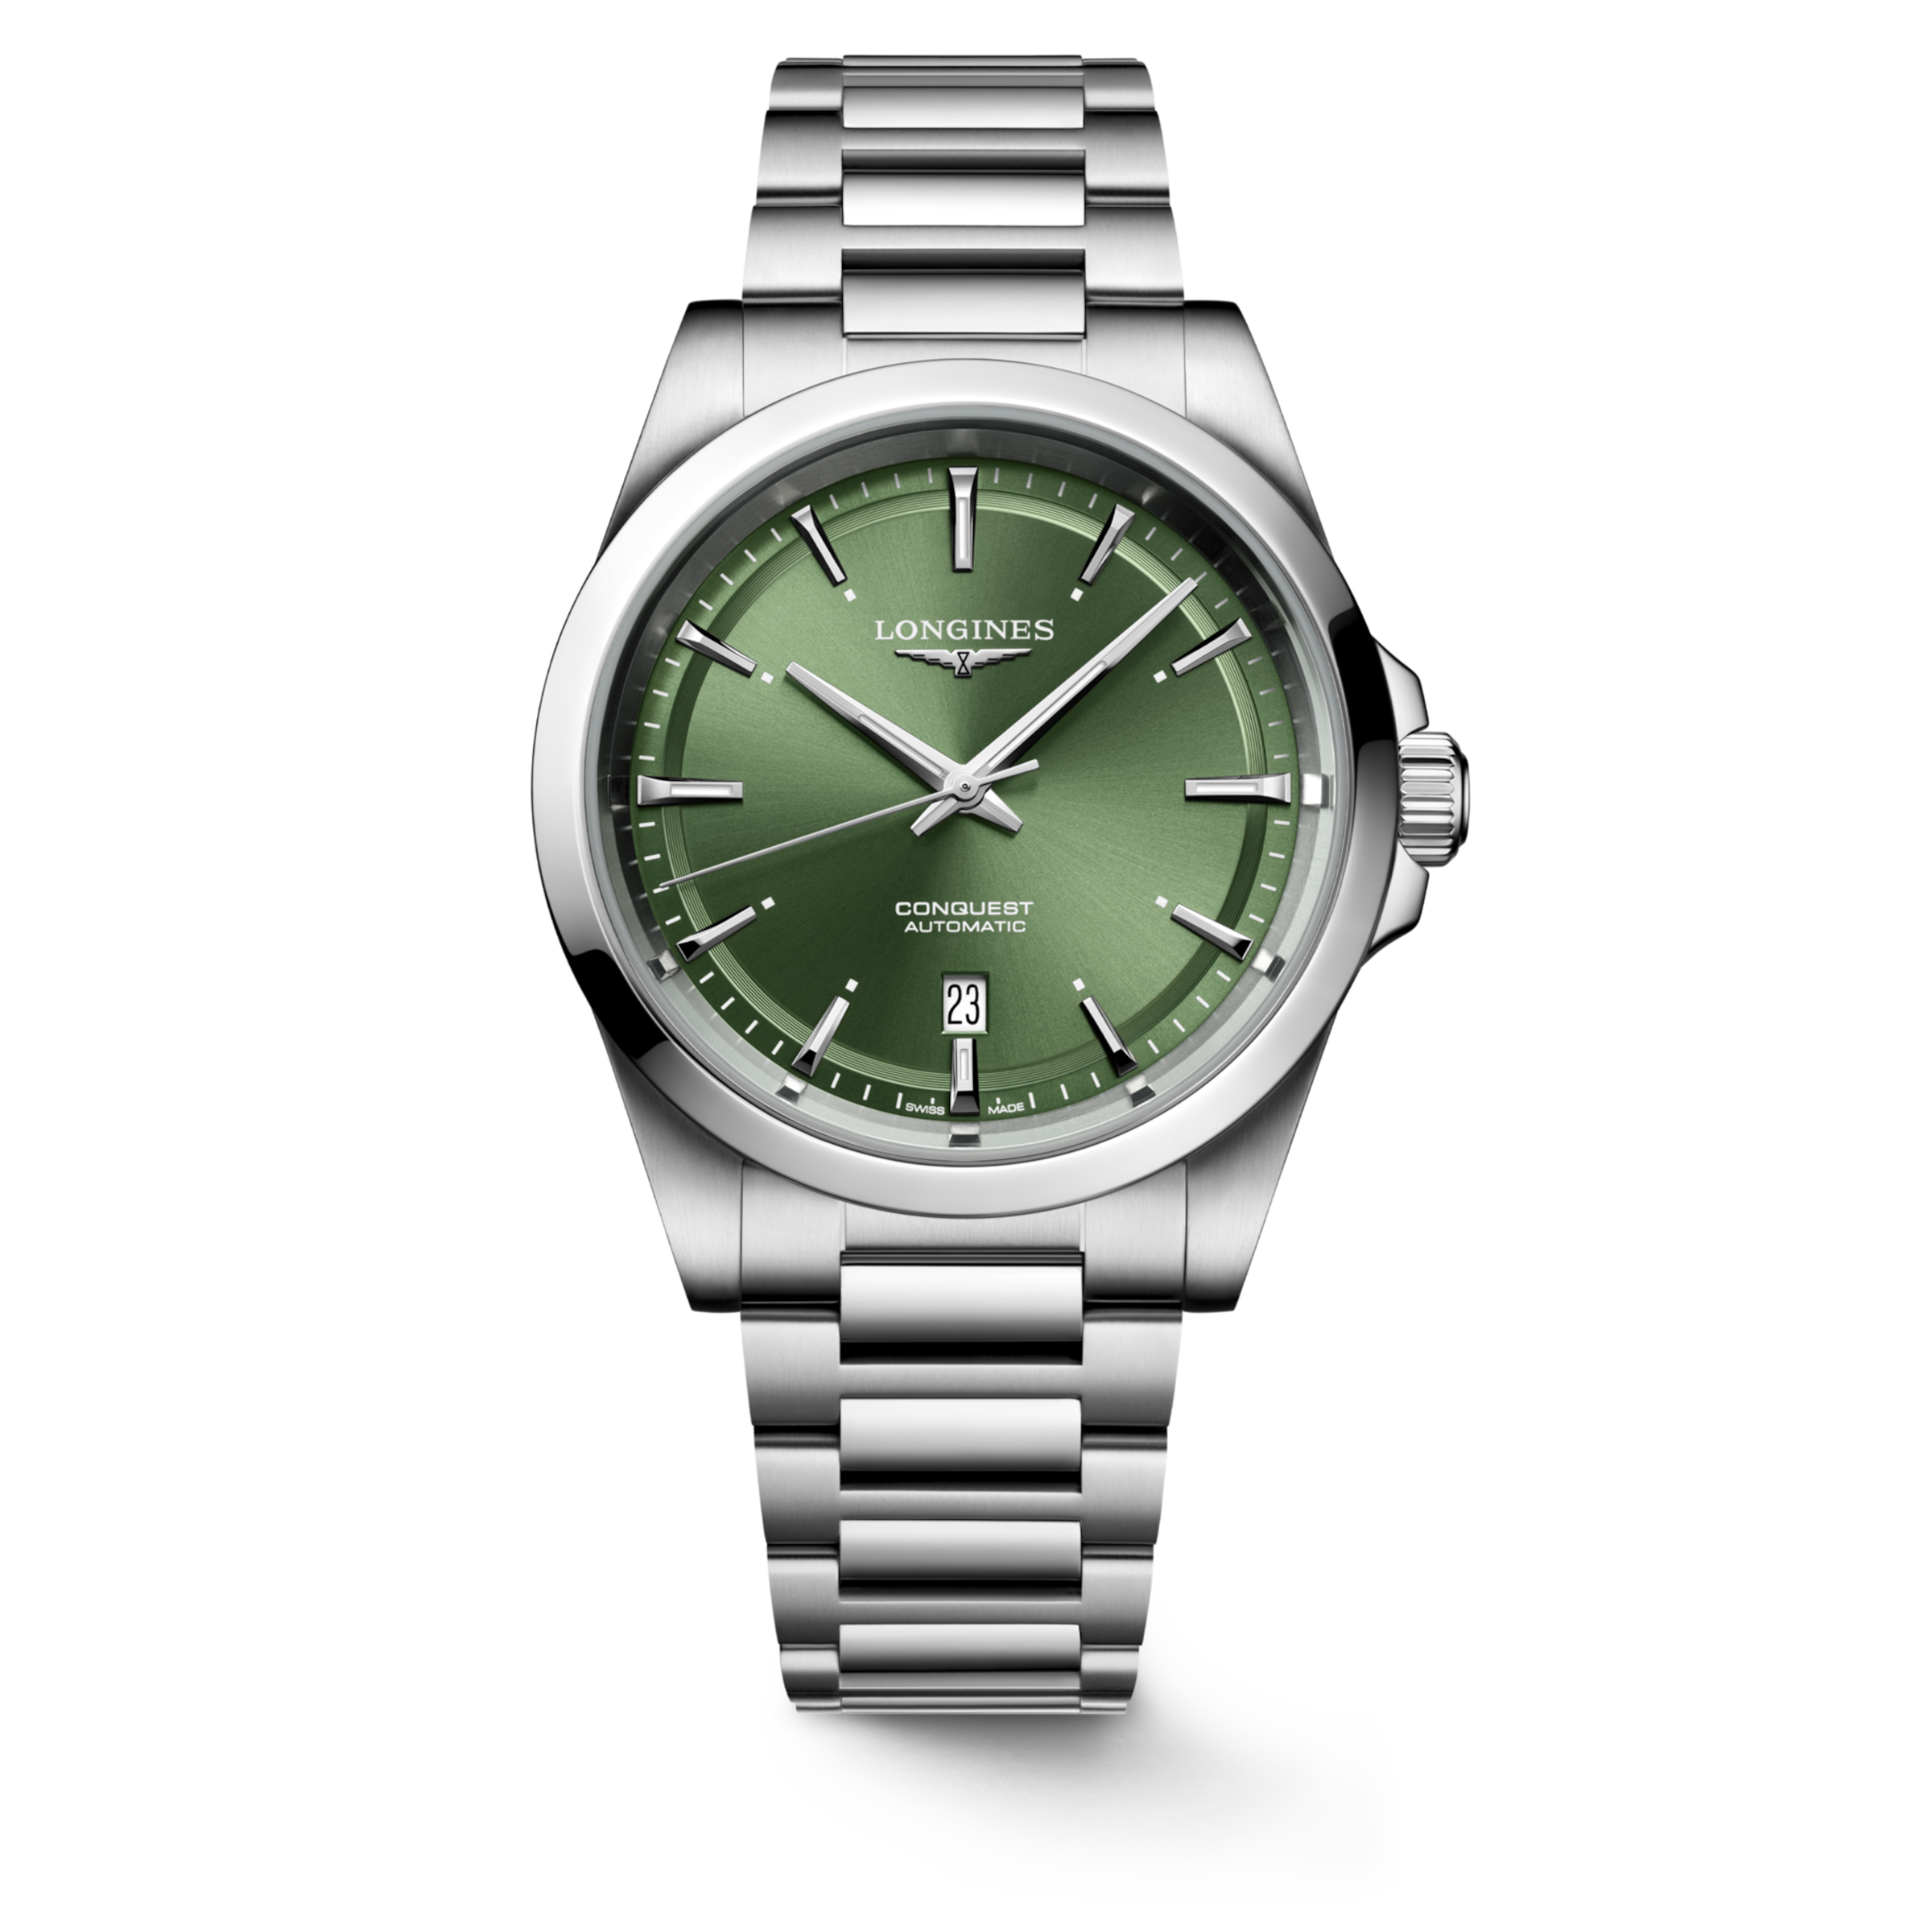 CONQUEST Automatic, Stainless Steel, Sunray Green Dial, Bracelet Watch | Longines® GB